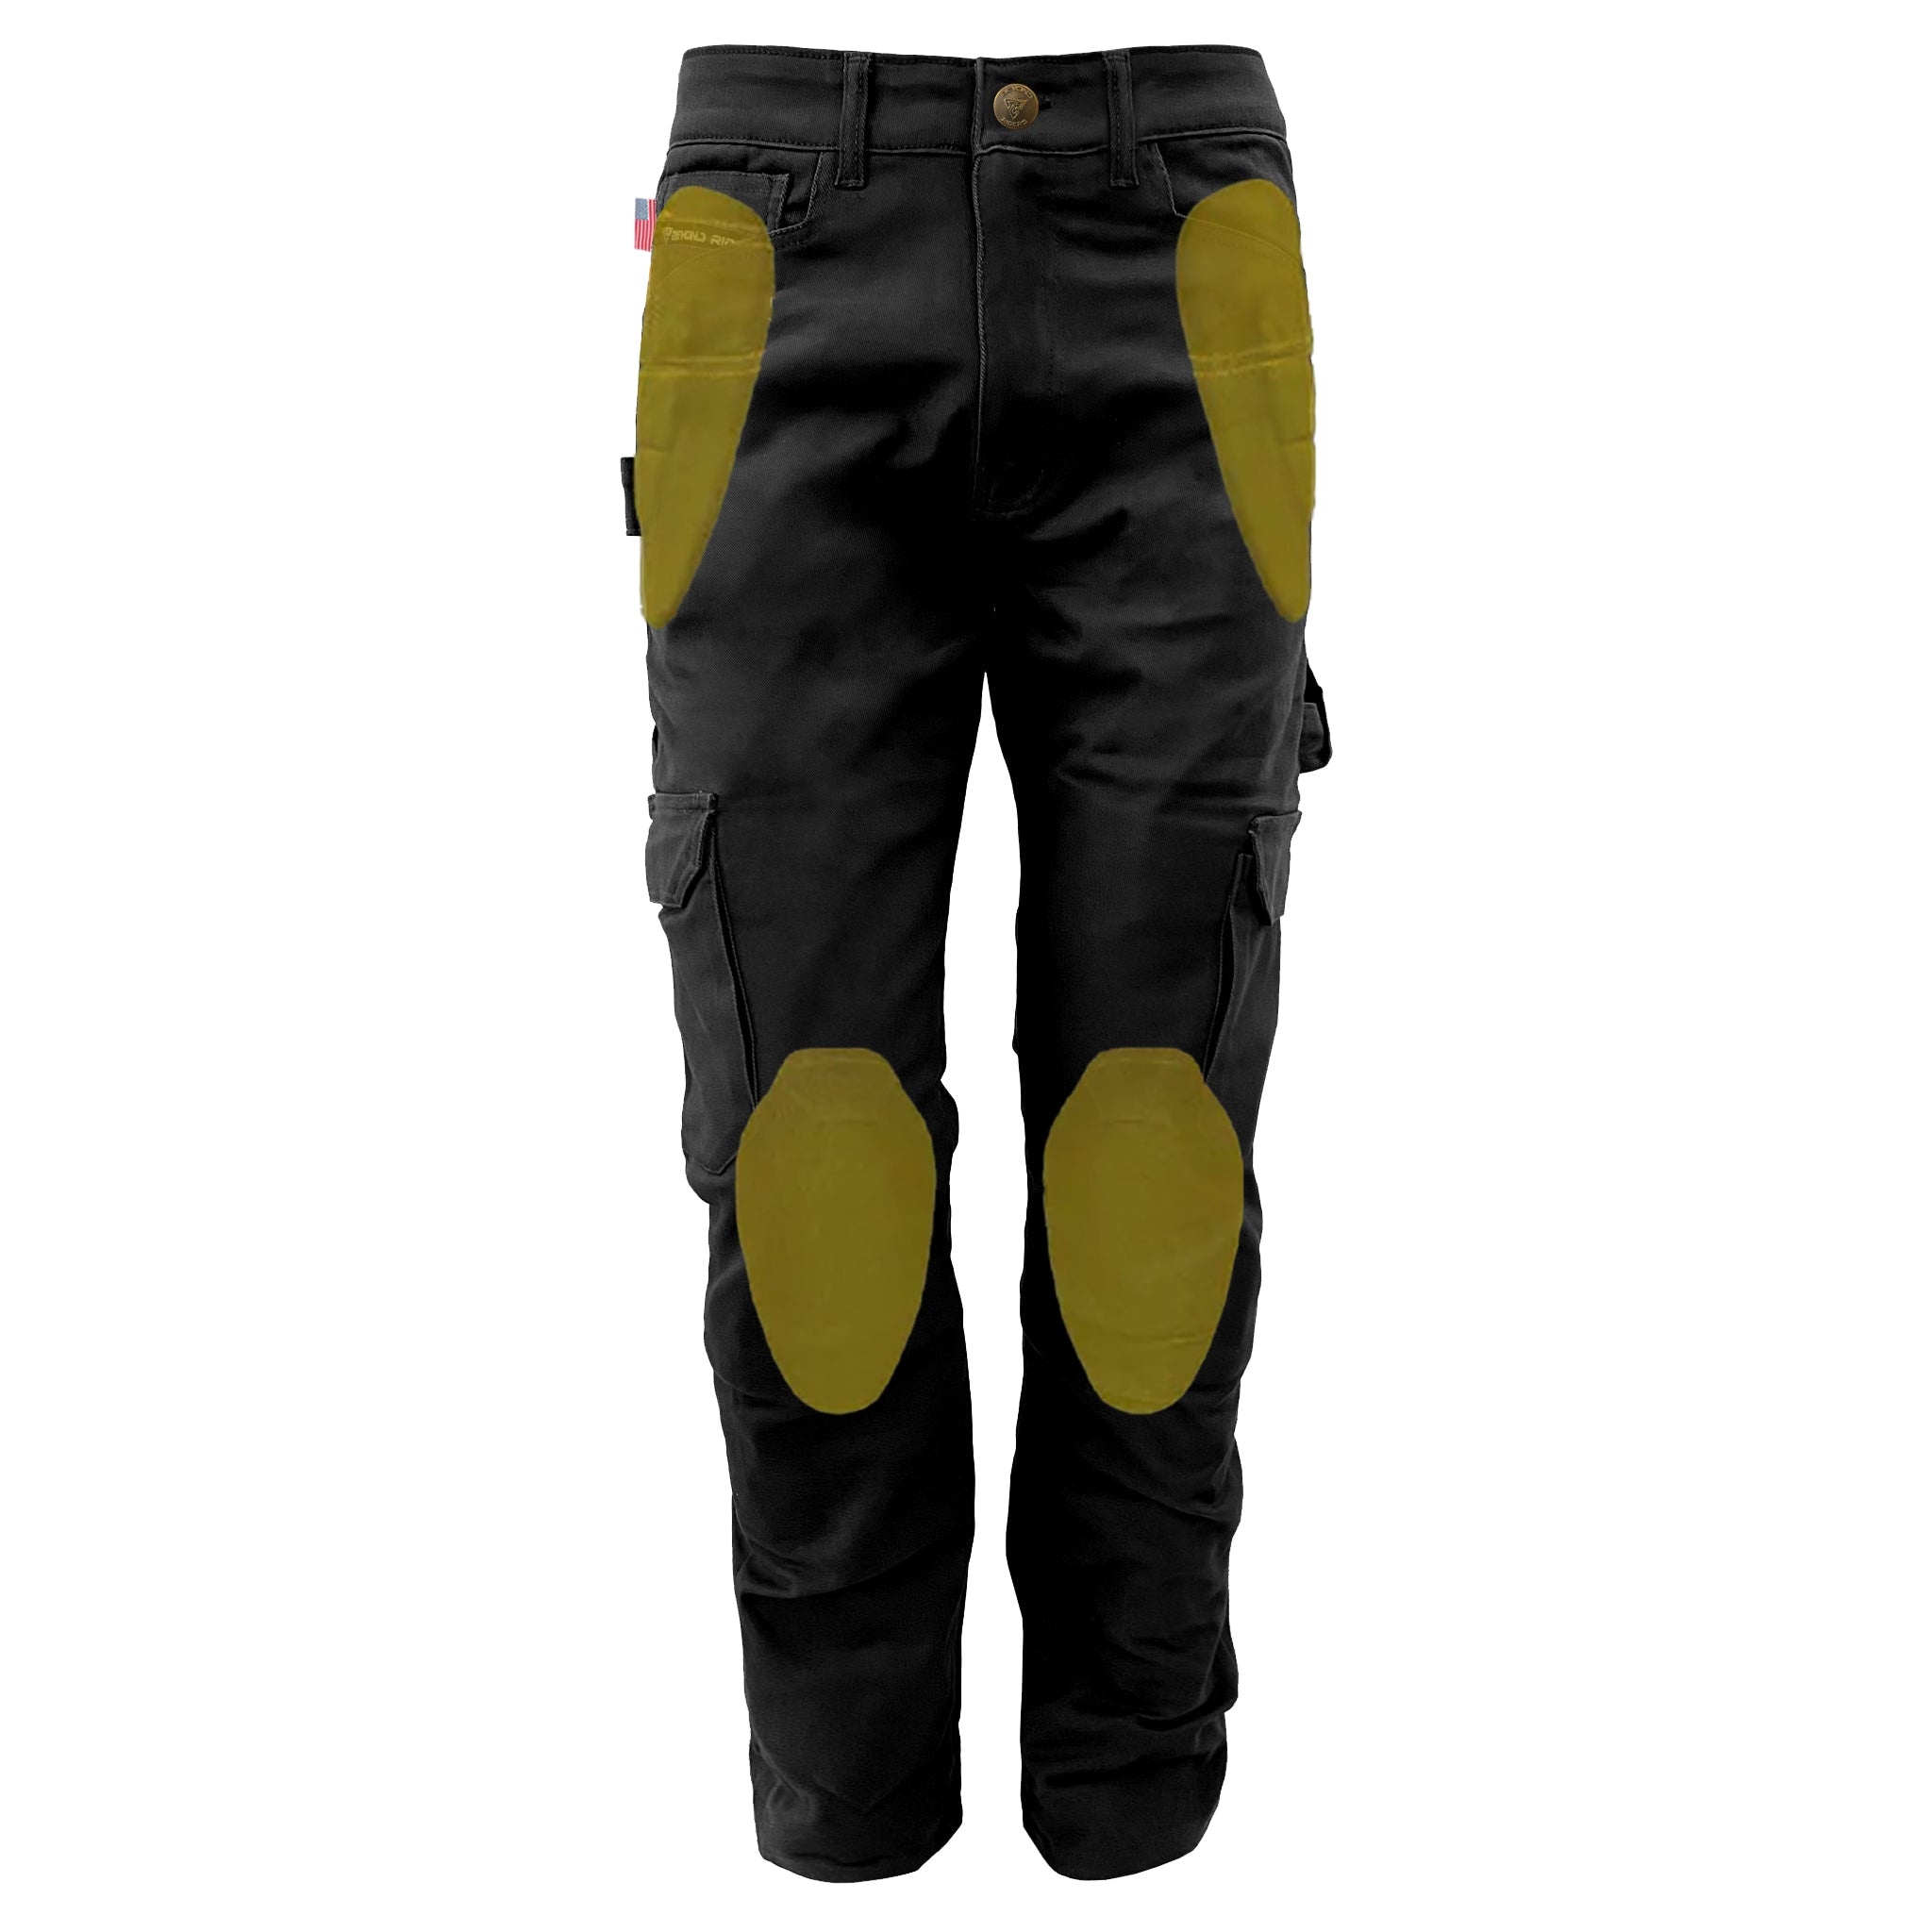 Relaxed Fit Cargo Pants - Black with Pads 40 / 34 / Black